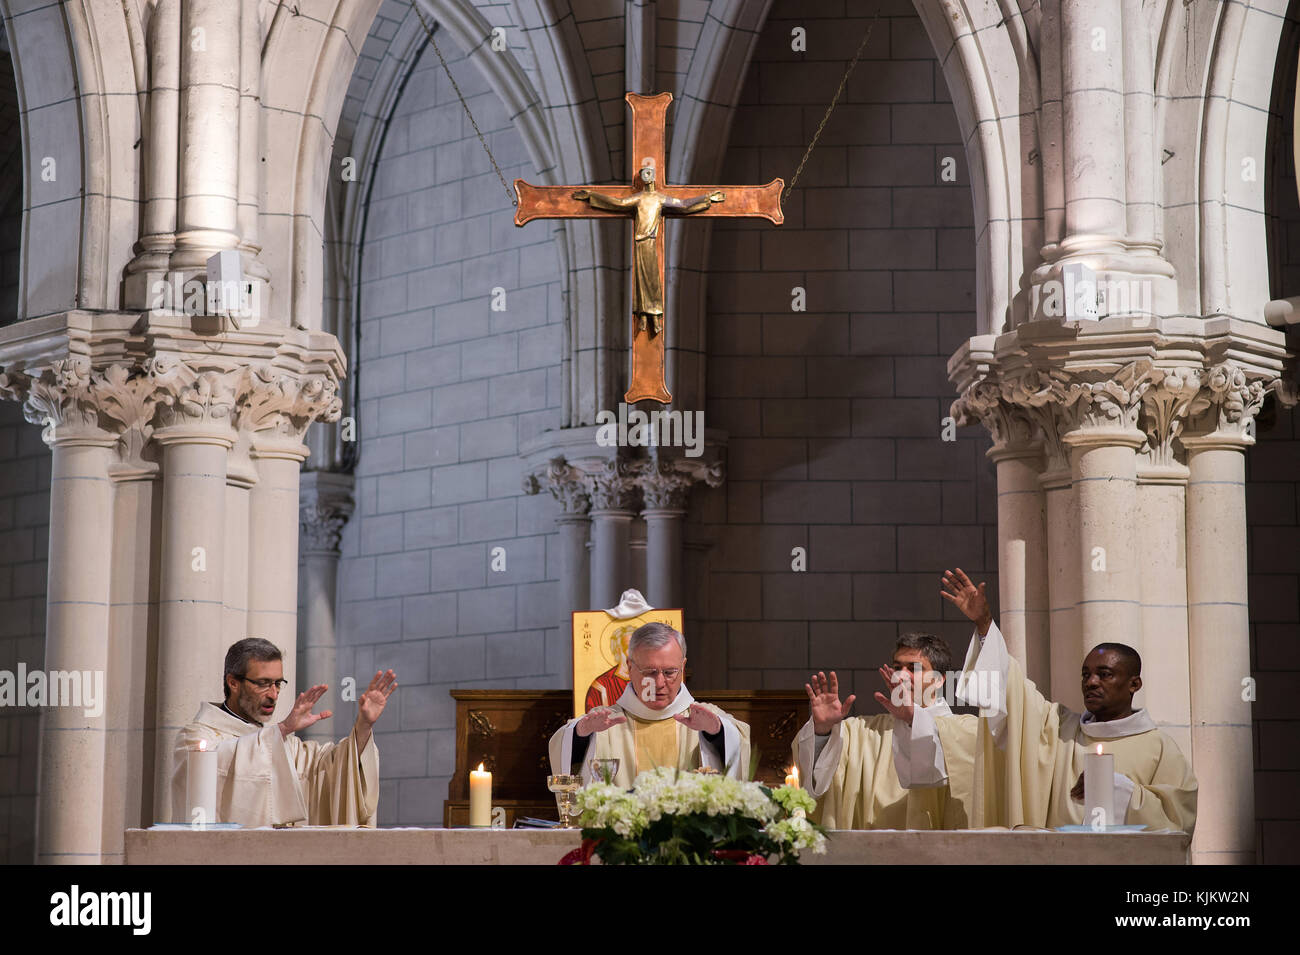 Mass in a French catholic church. Paris. France. Stock Photo